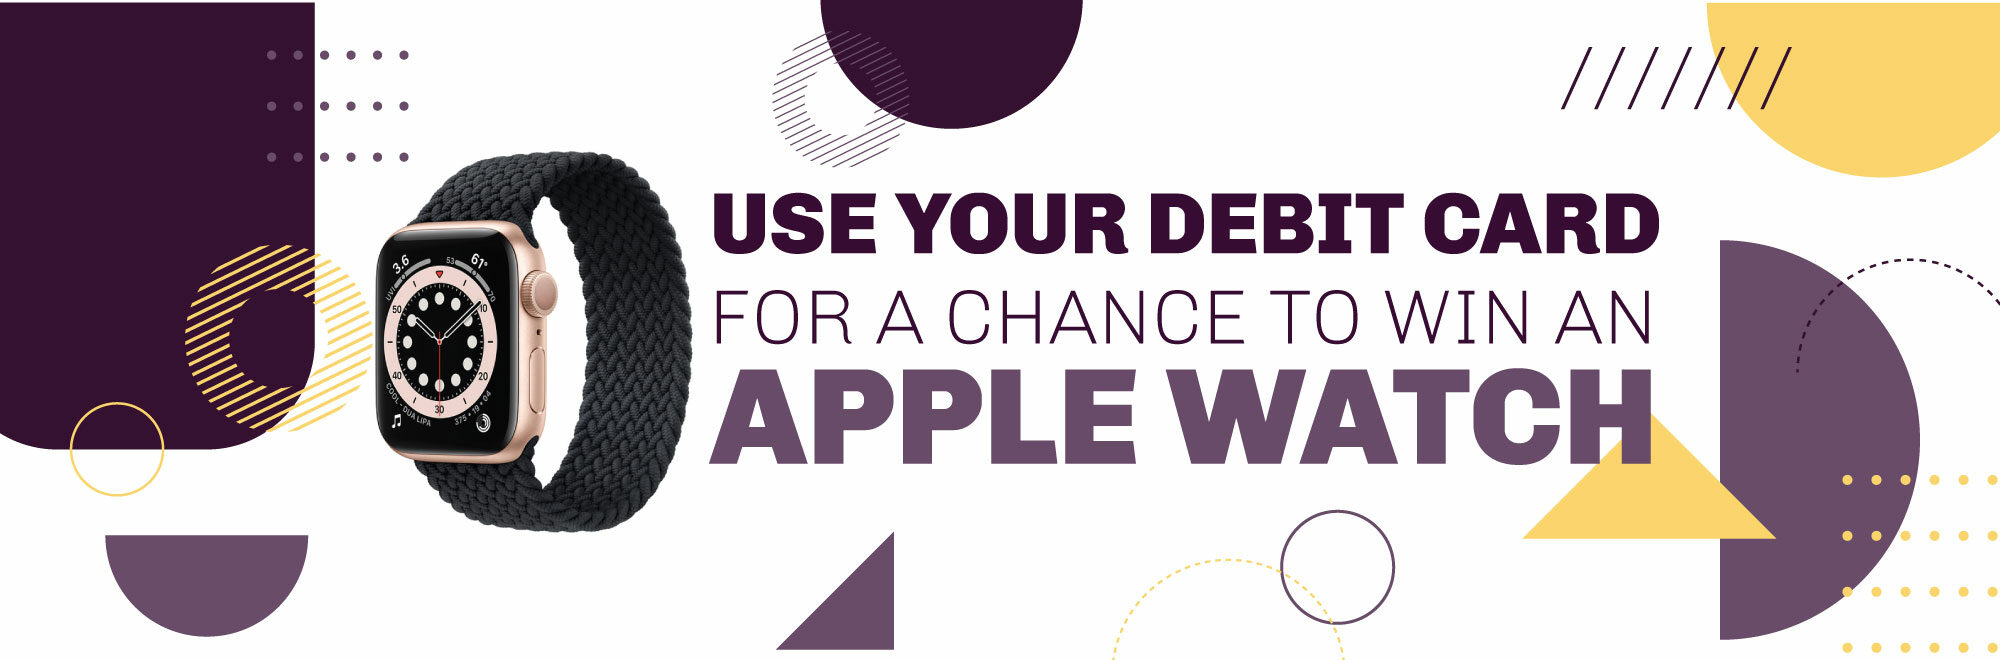 Use your debit card with signature for a chance to win a Apple Watch.